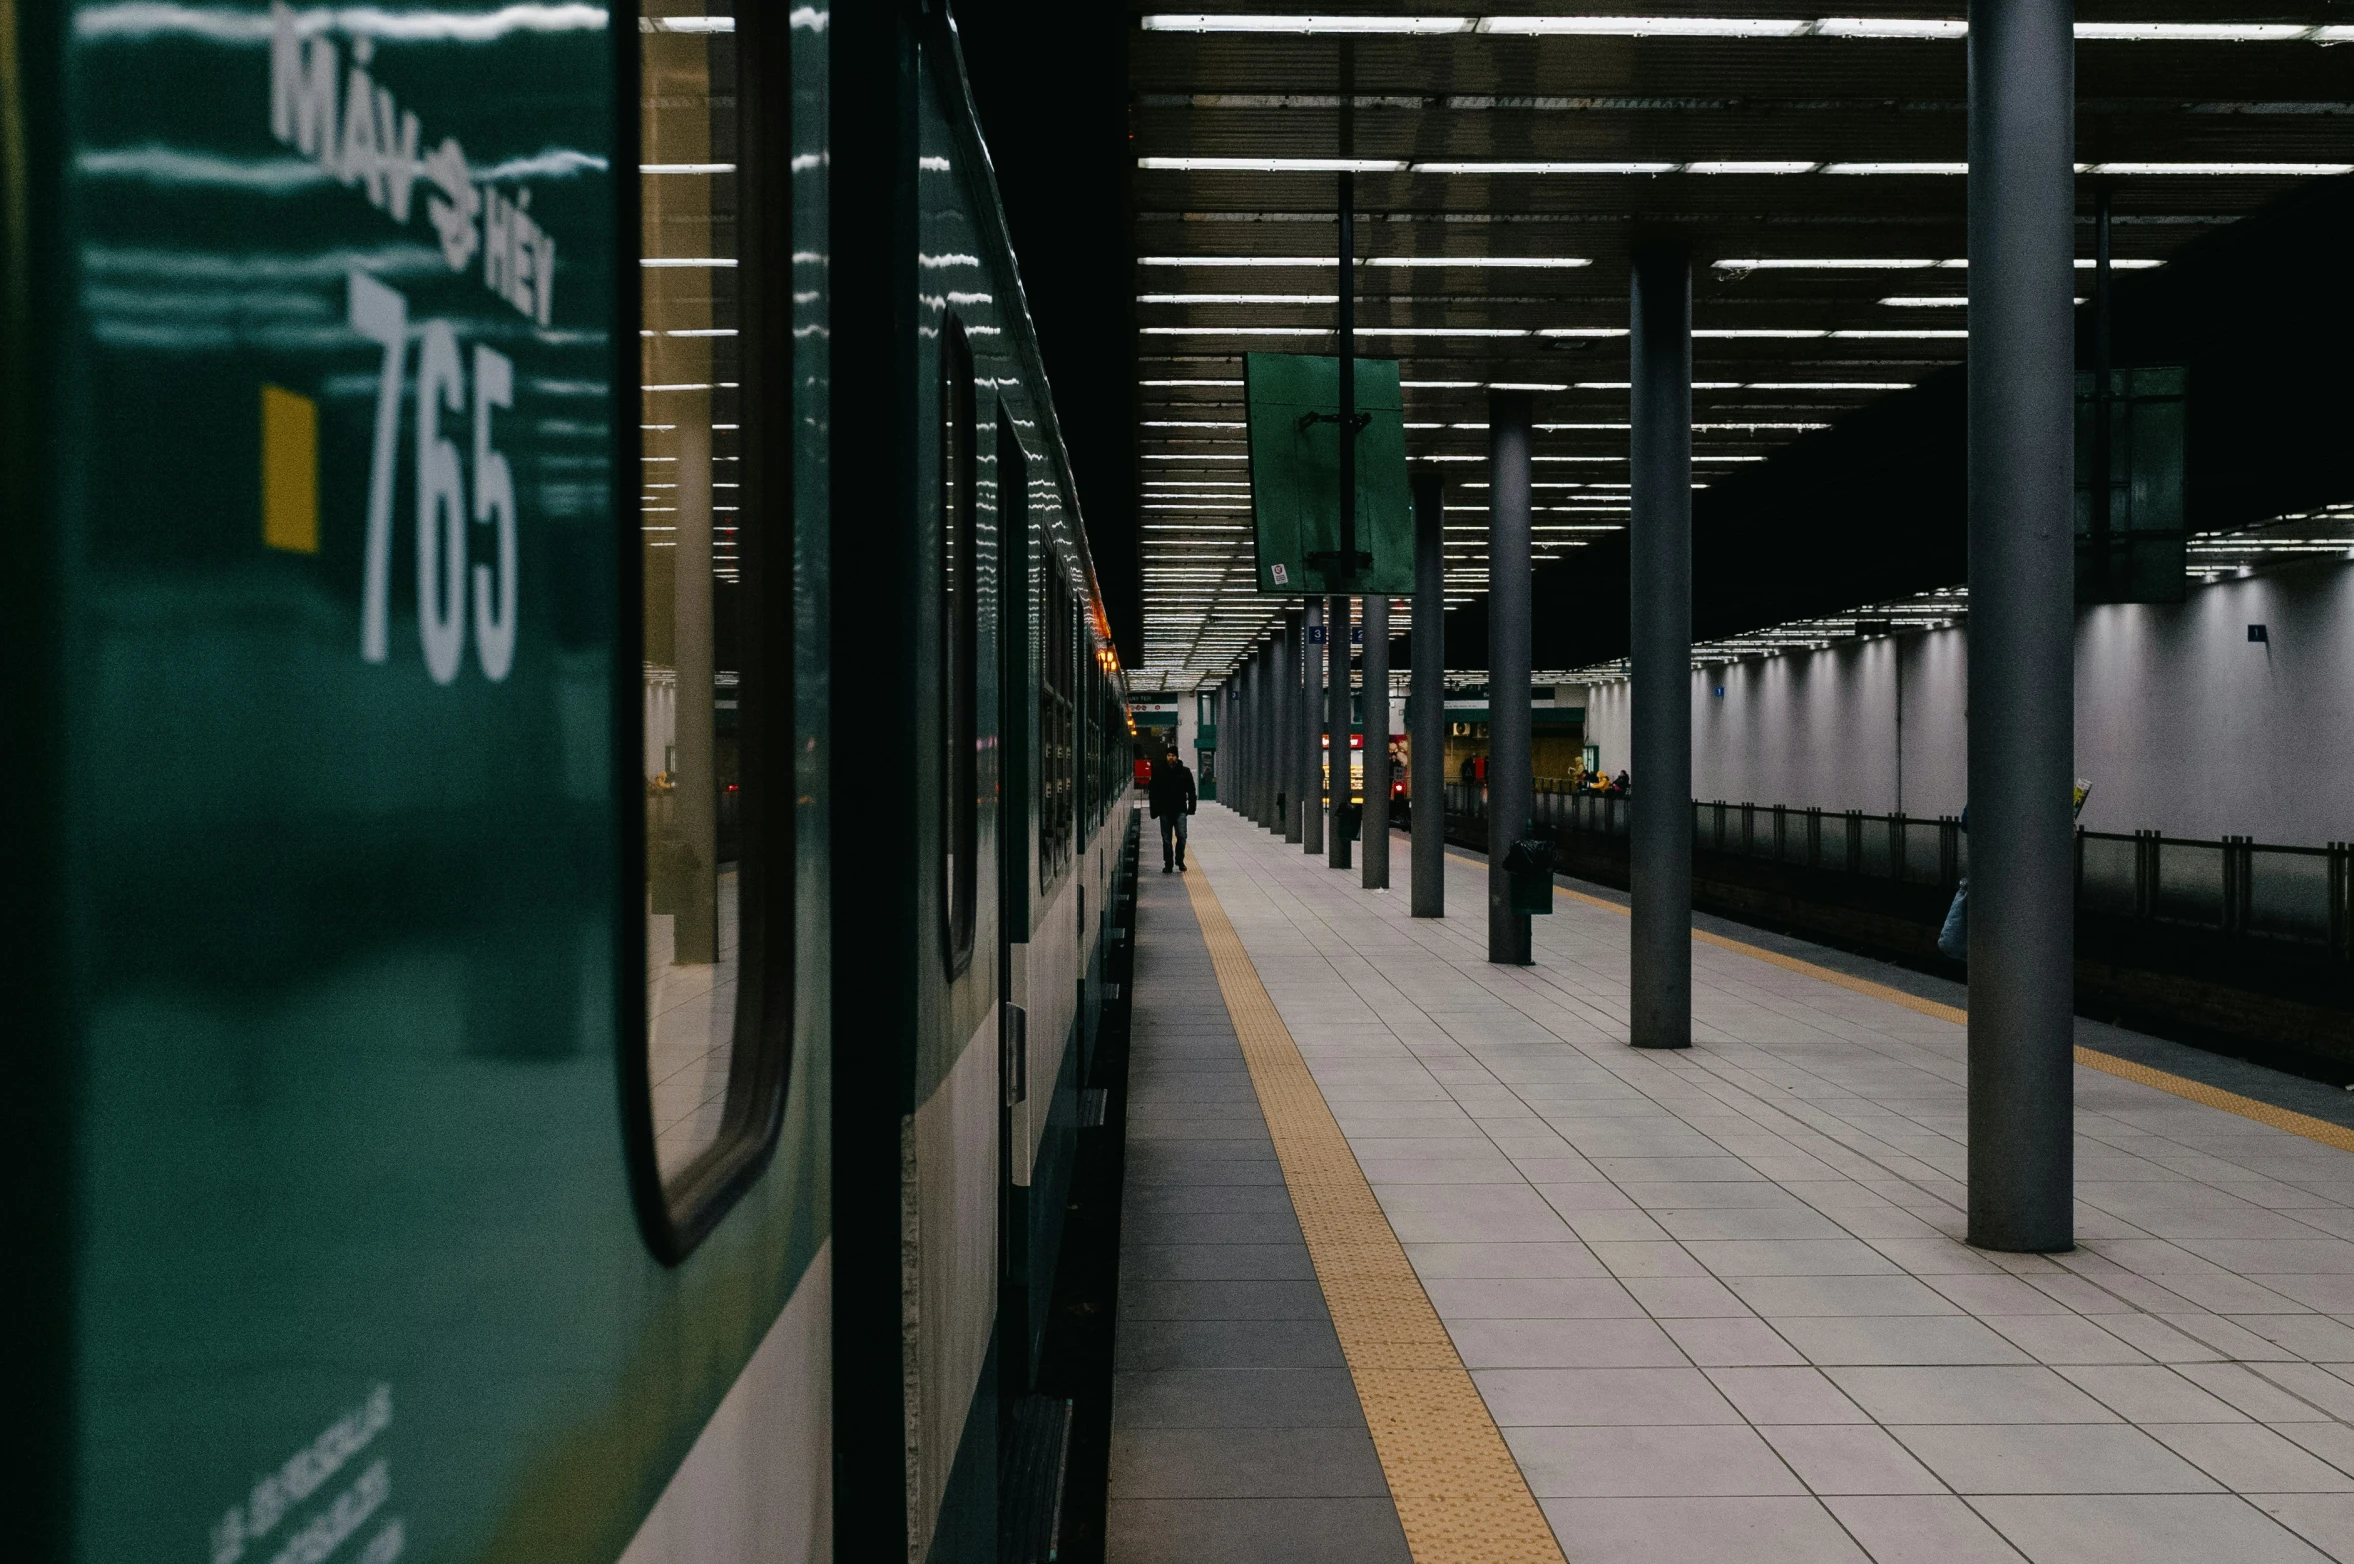 the empty train station has three green trains parked next to each other